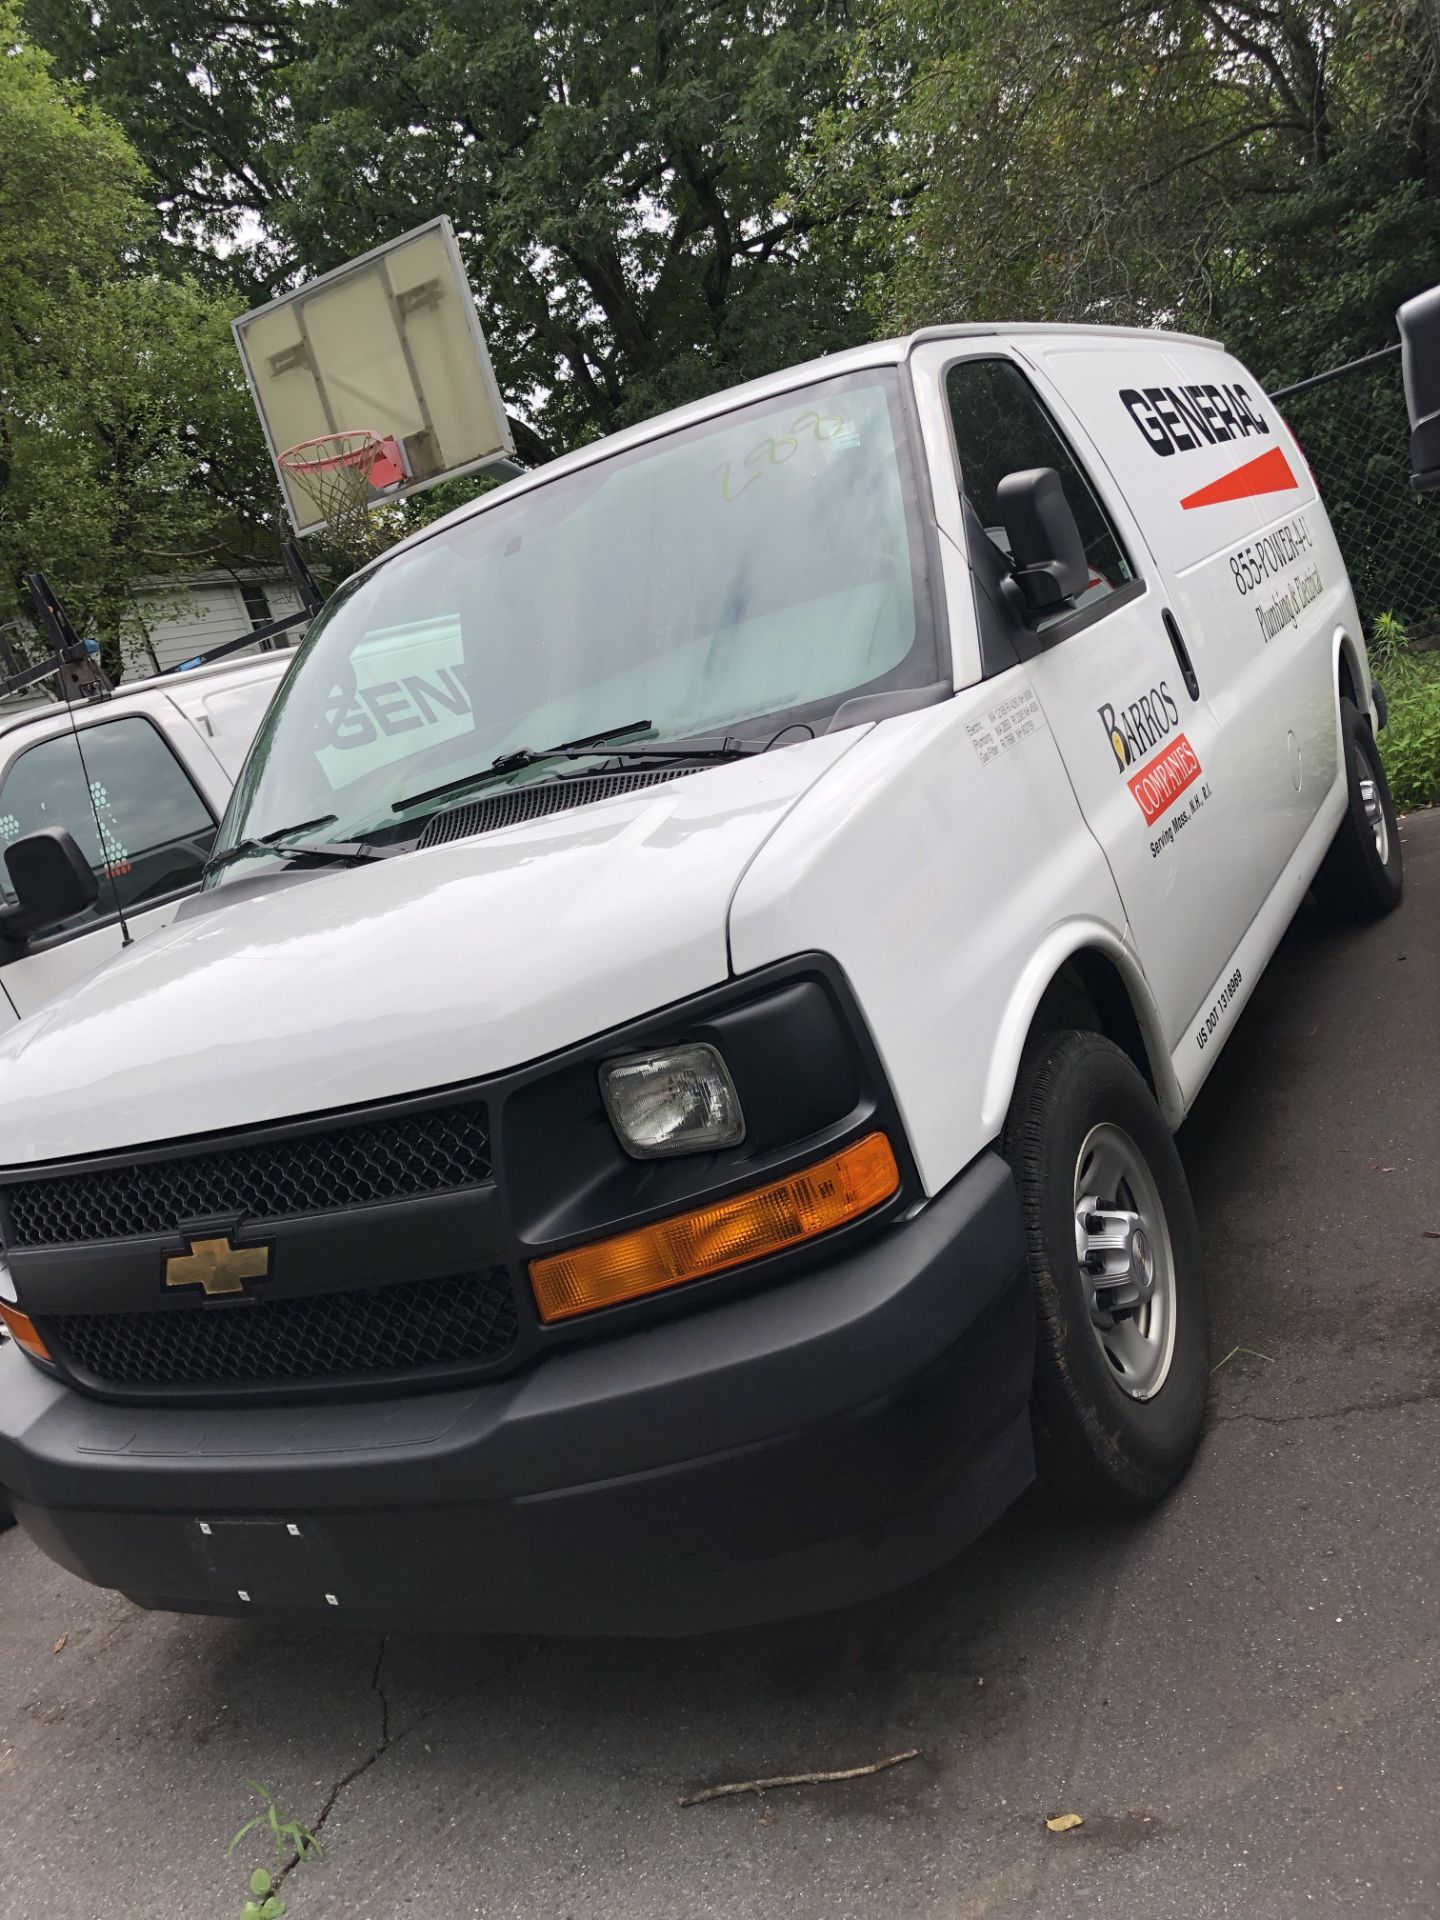 2017 Chevrolet Express Van #2500 w/Sec. Grate Shelving & Roof Rack,Leather Int.,Odom:37,486, (TITLE)